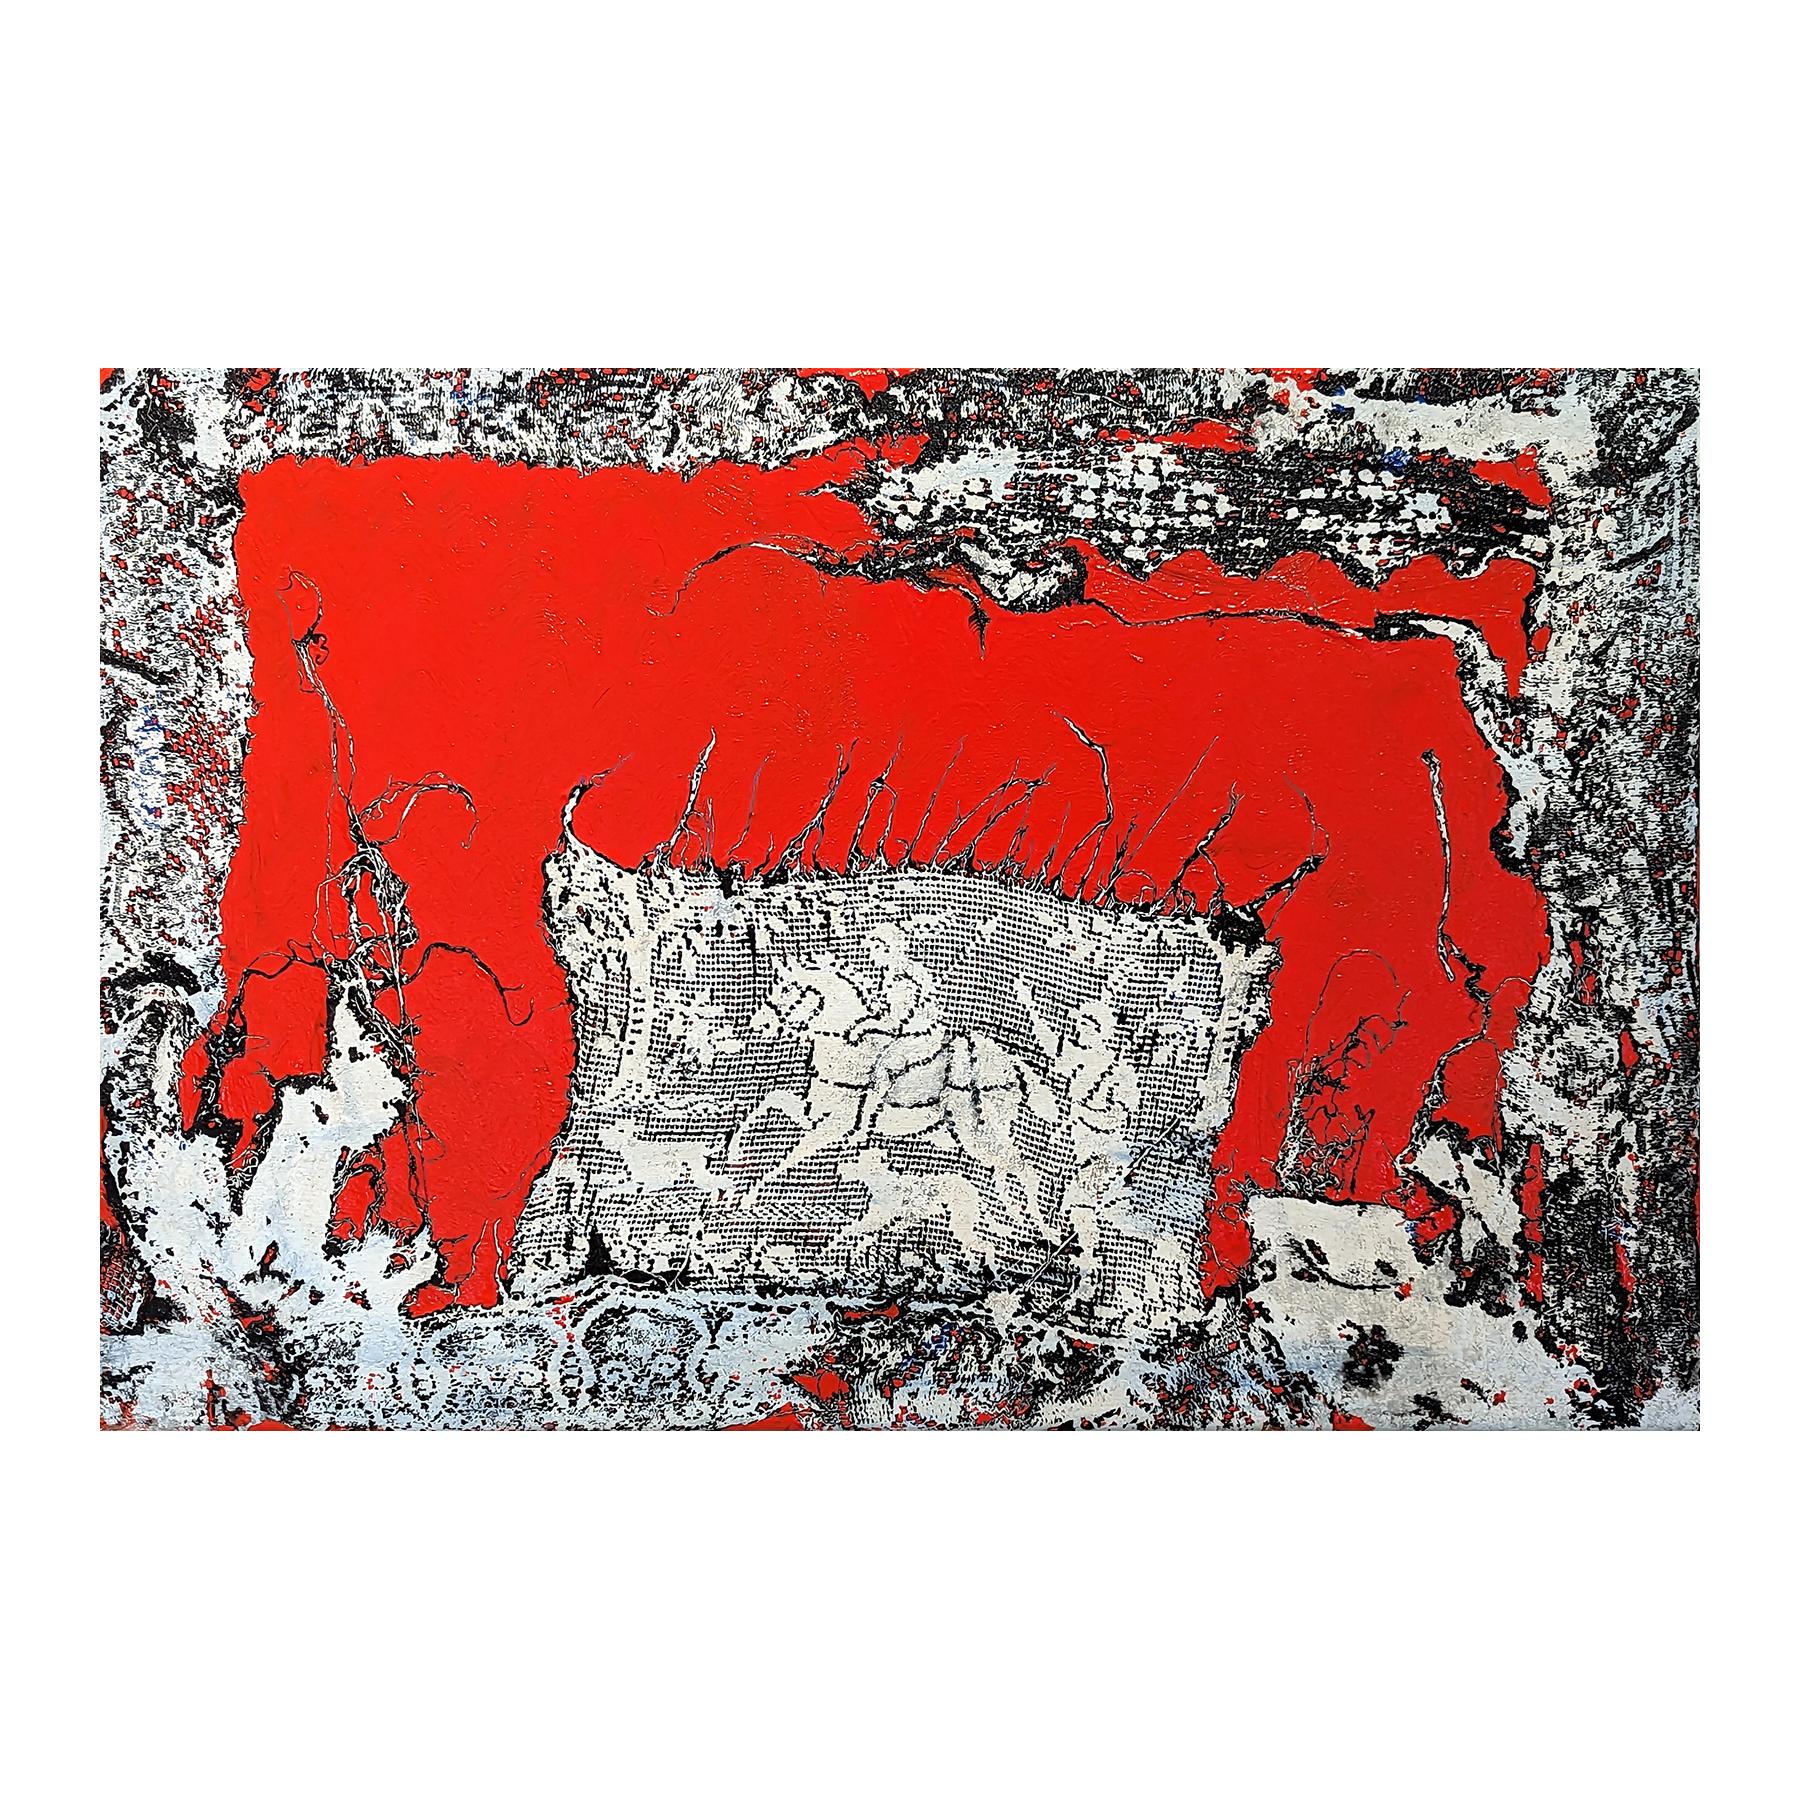 Contemporary red acrylic painting in a unique lace textured landscape by Houston artist Mark Flood. Originally a background element in Flood's pieces, lace eventually evolved into a main motif in his body of work. The piece is signed, titled, and